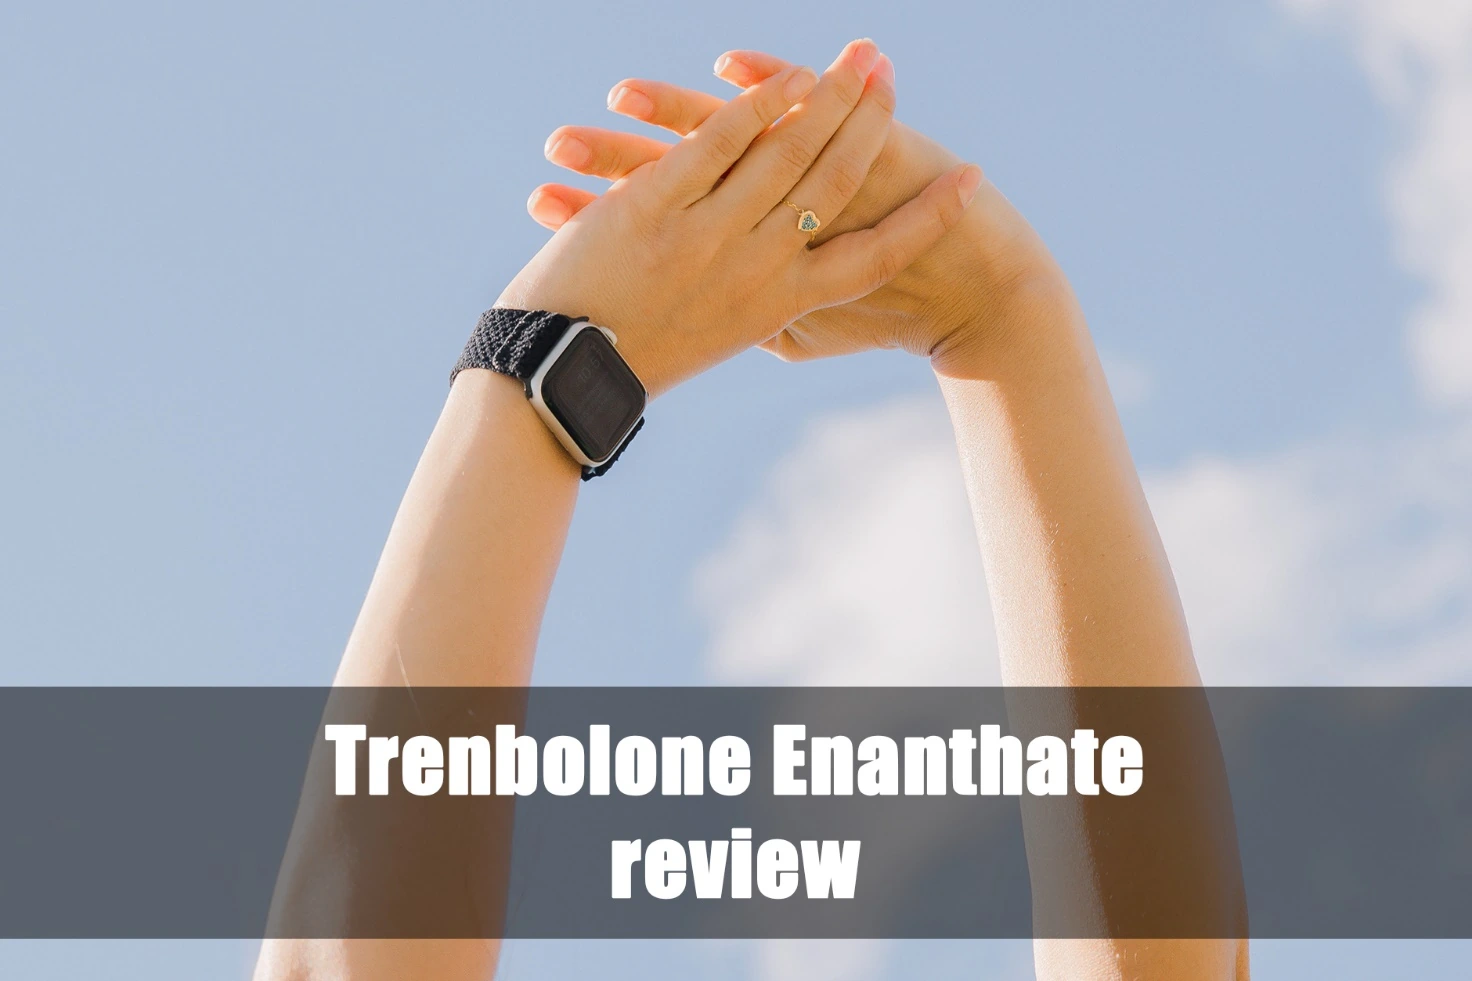 Trenbolone Enanthate review